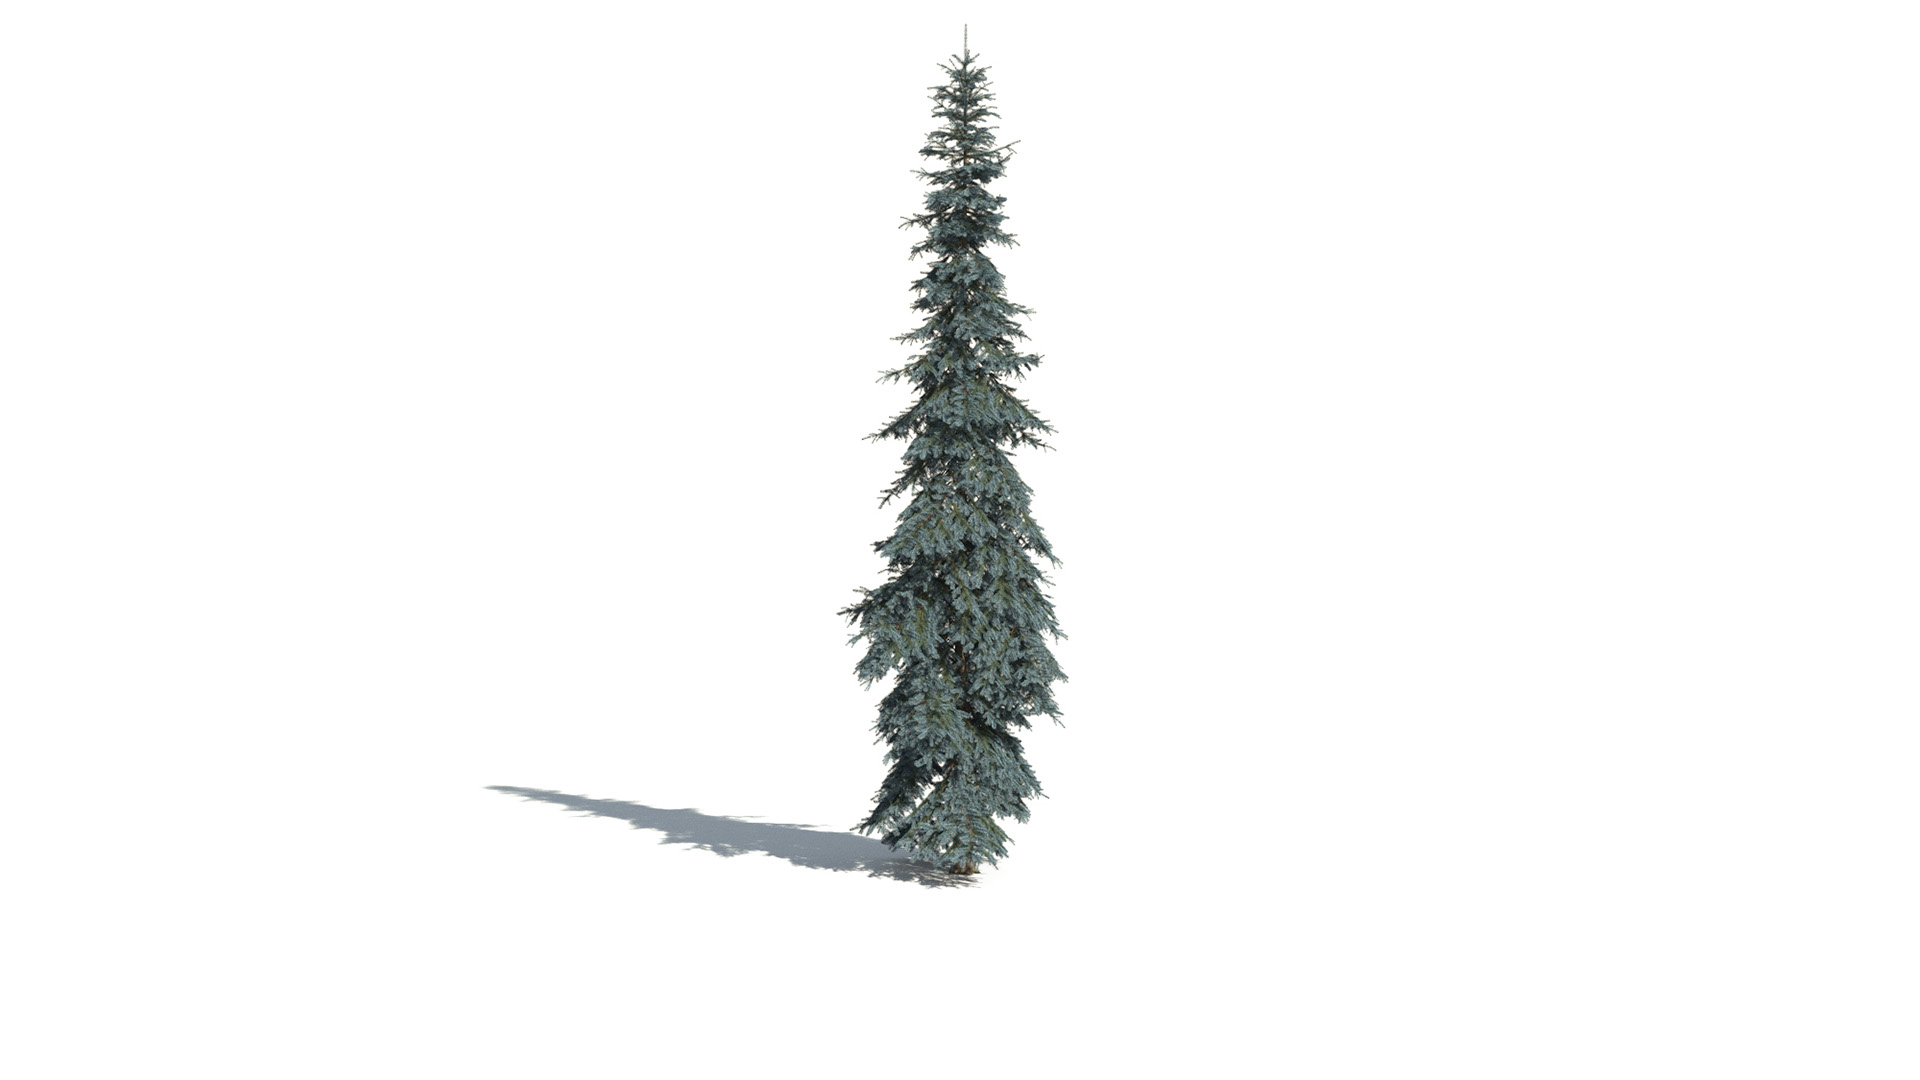 3D model of the Colorado Blue spruce Koster Picea pungens 'Koster'